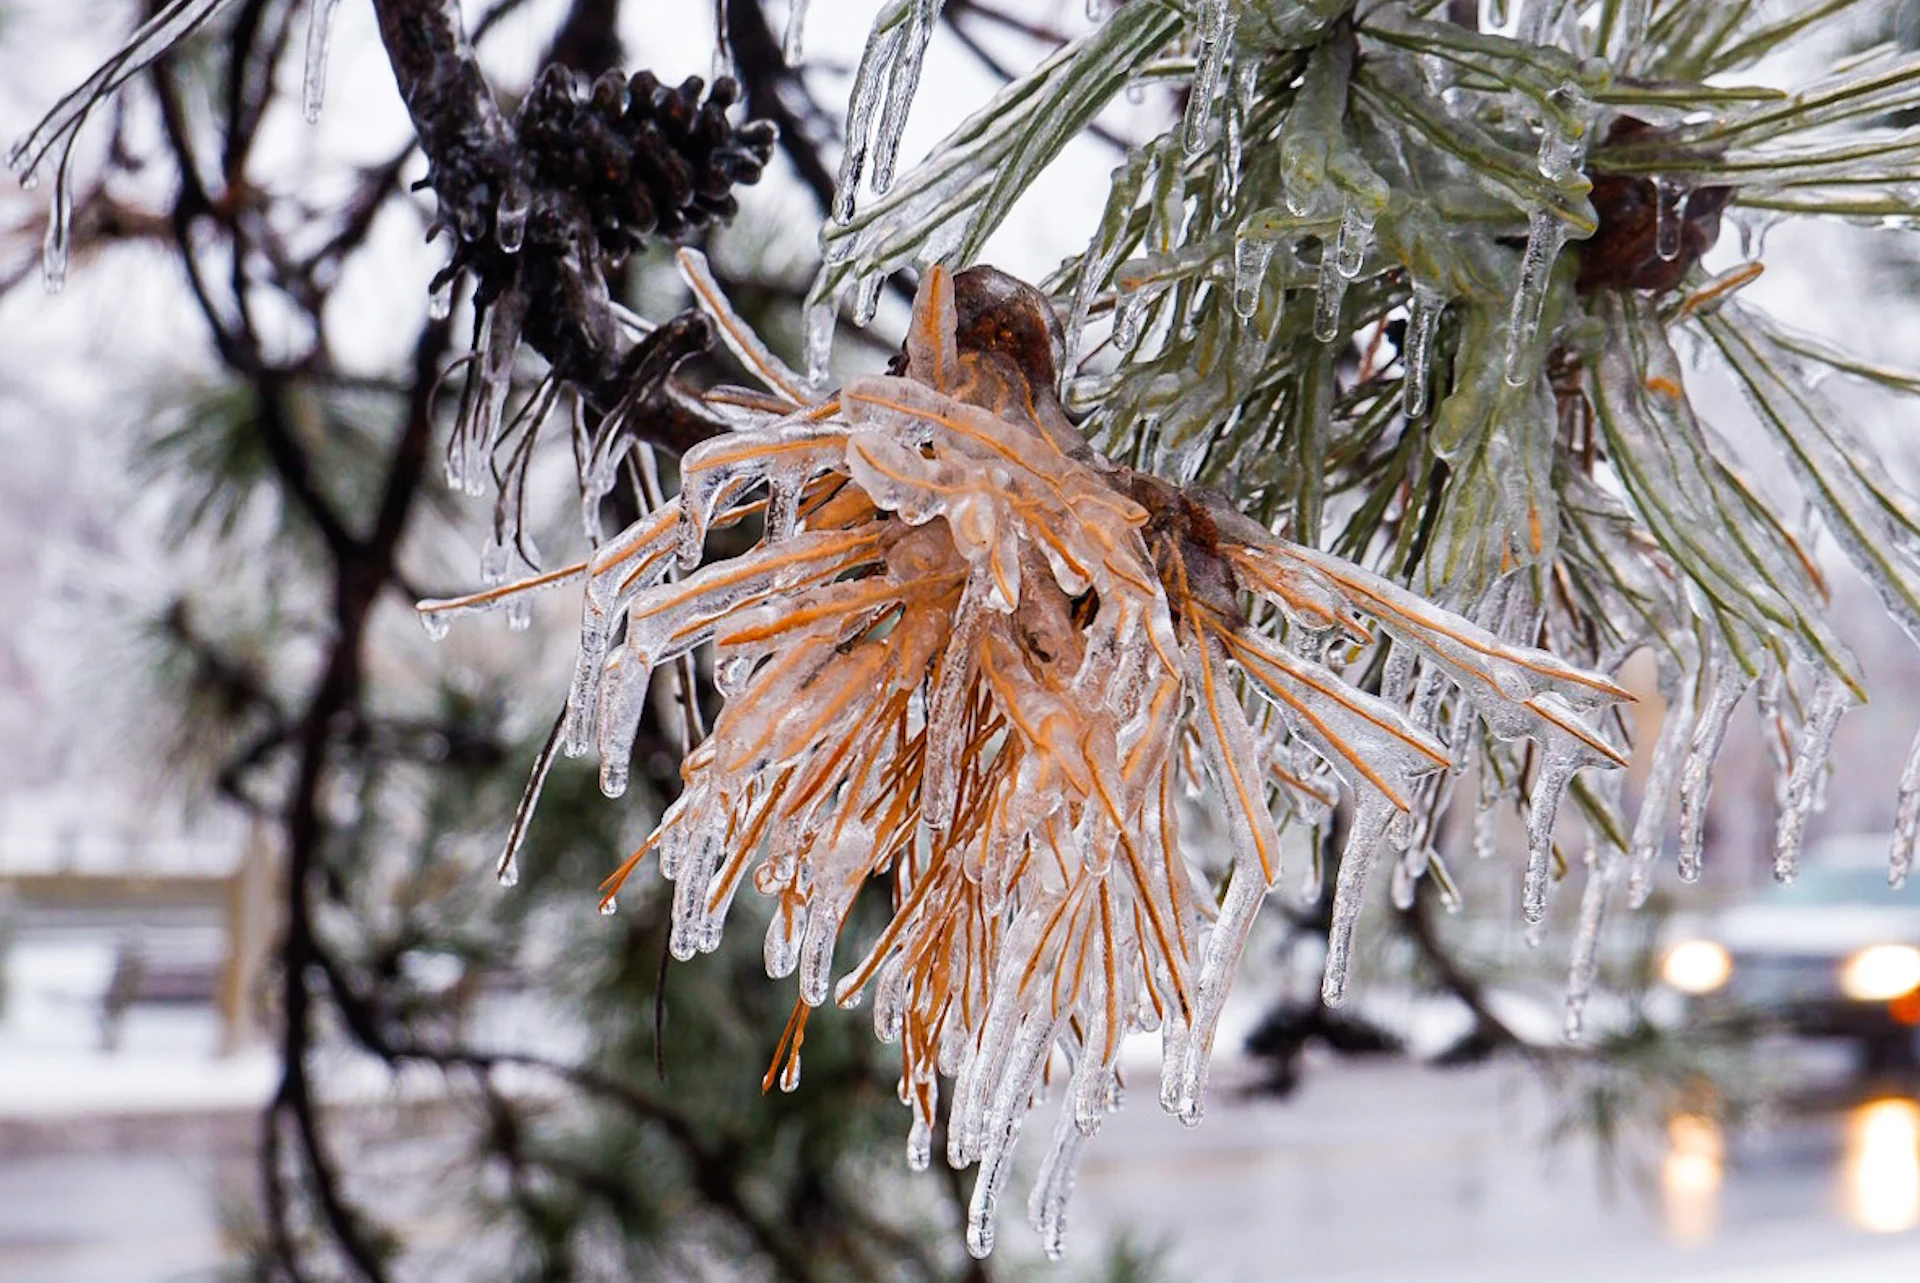 Expect travel issues Monday as ice threatens northern Ontario